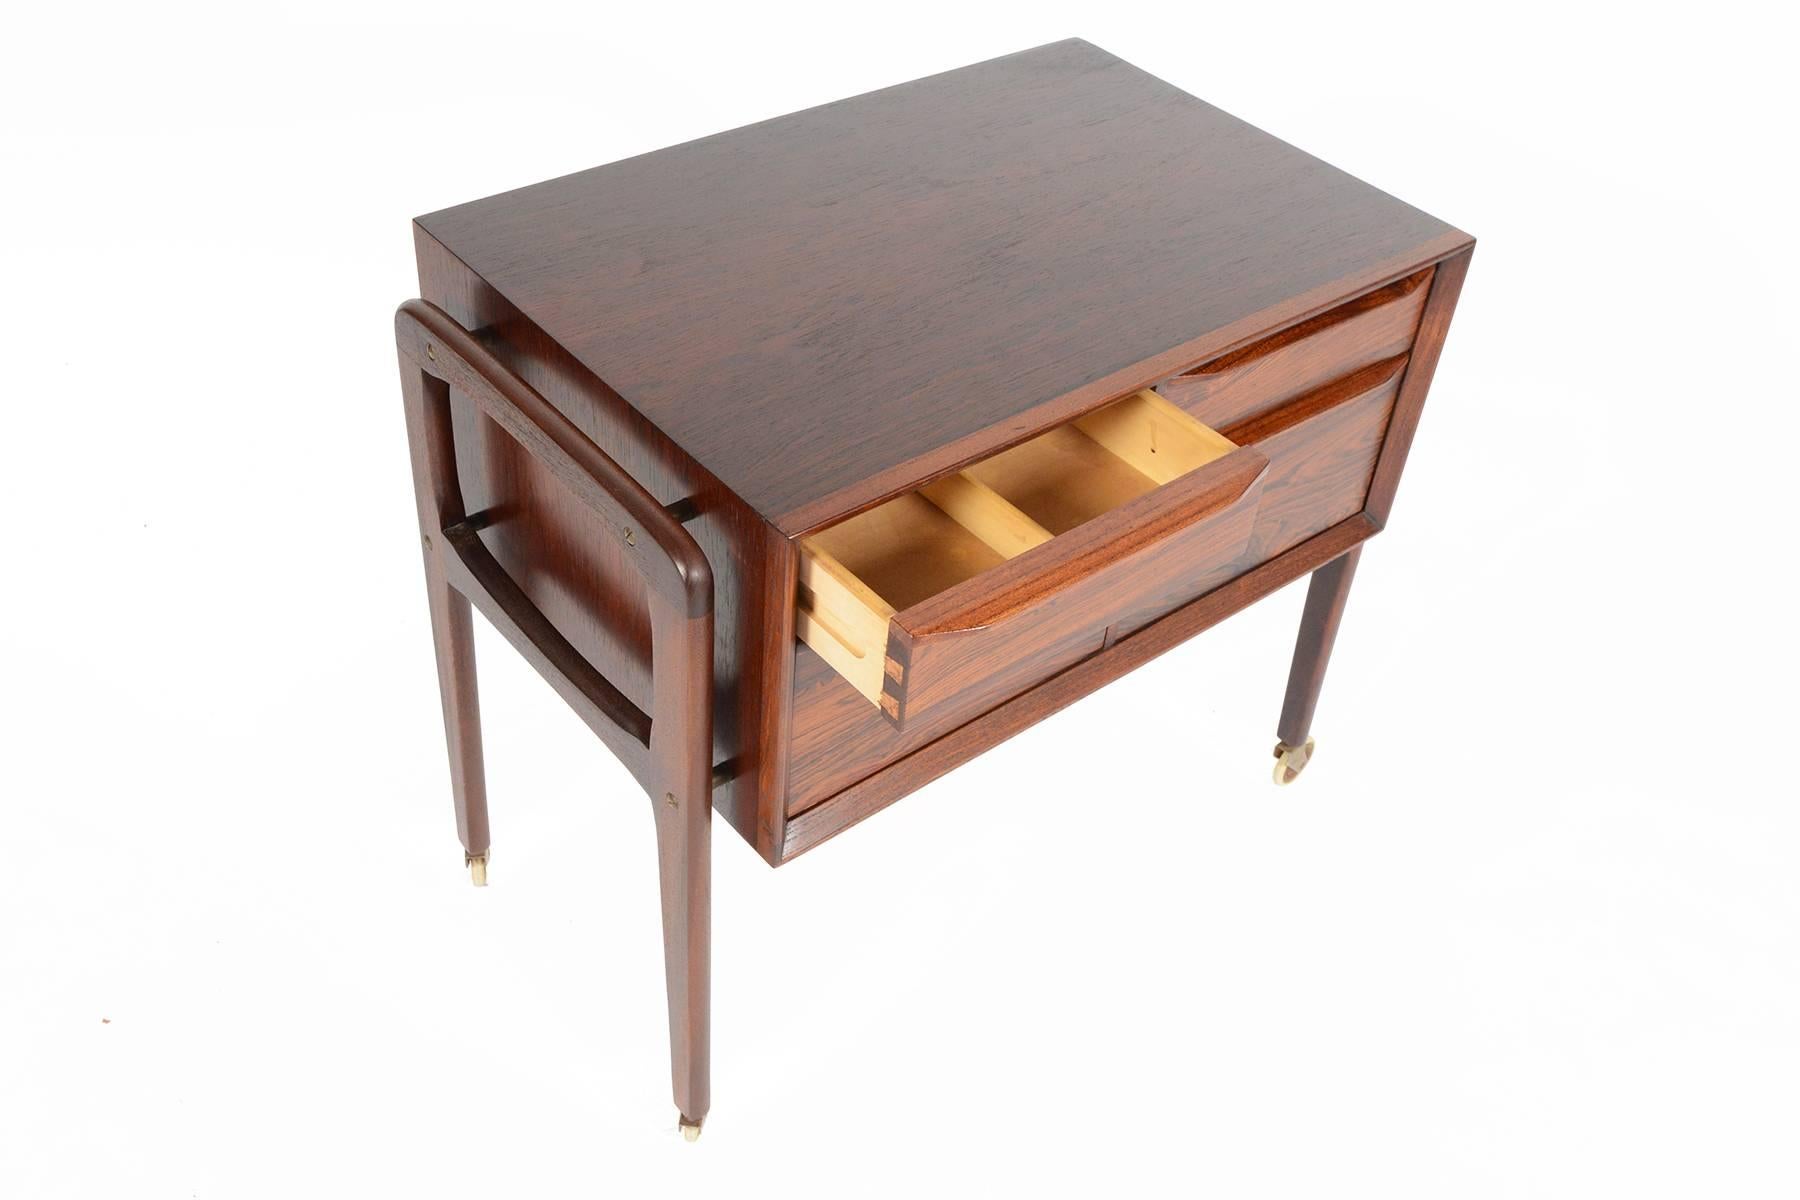 This Danish modern midcentury four drawer sewing cart in rosewood will be a wonderful addition to any modern home. This cart can be used for its original intention as a sewing cart or can easily transform into a striking bar cart. This well built